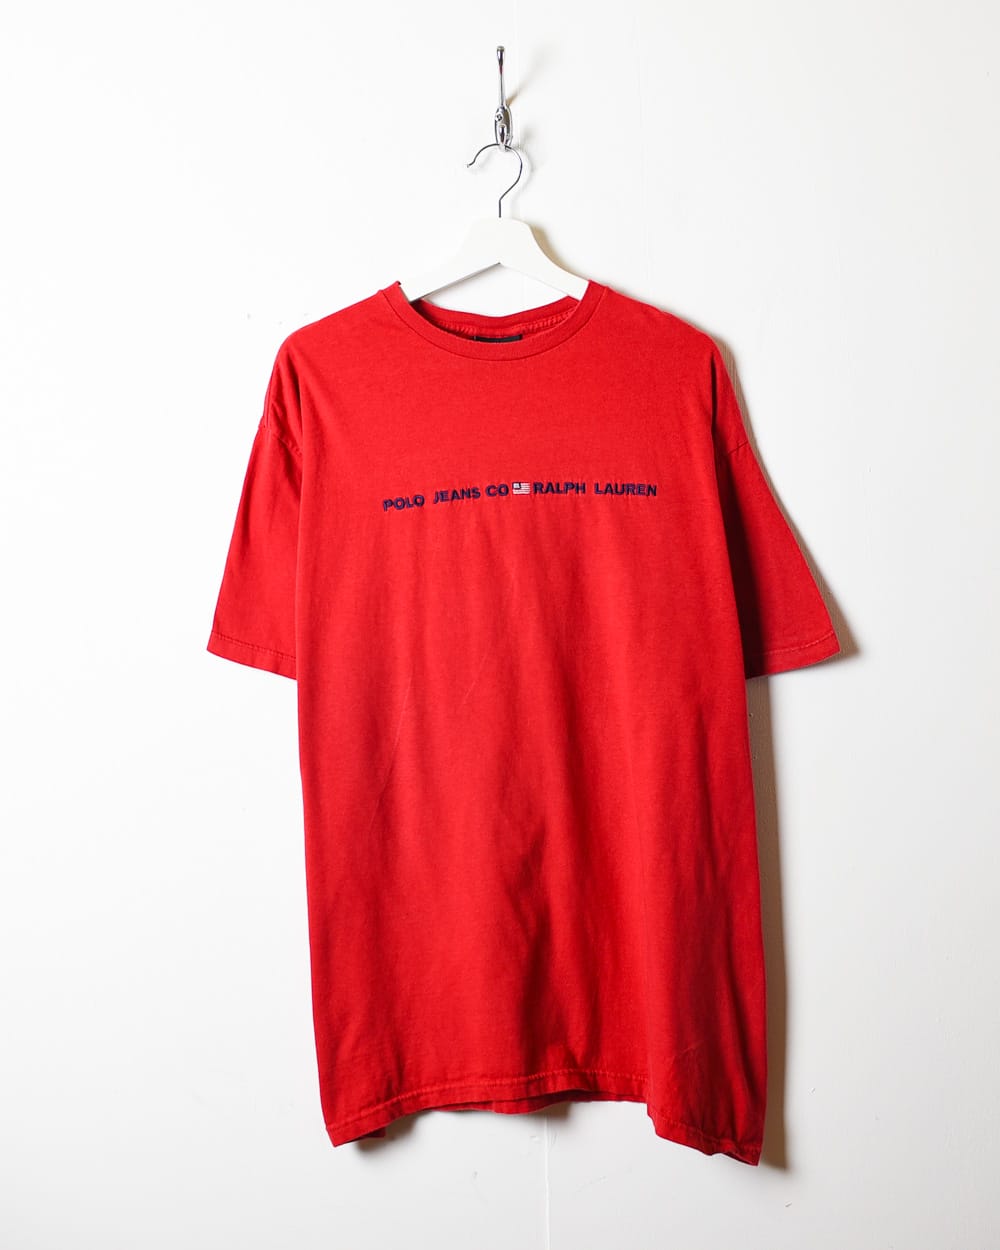 Red Polo Jeans Ralph Lauren T-Shirt - X-Large